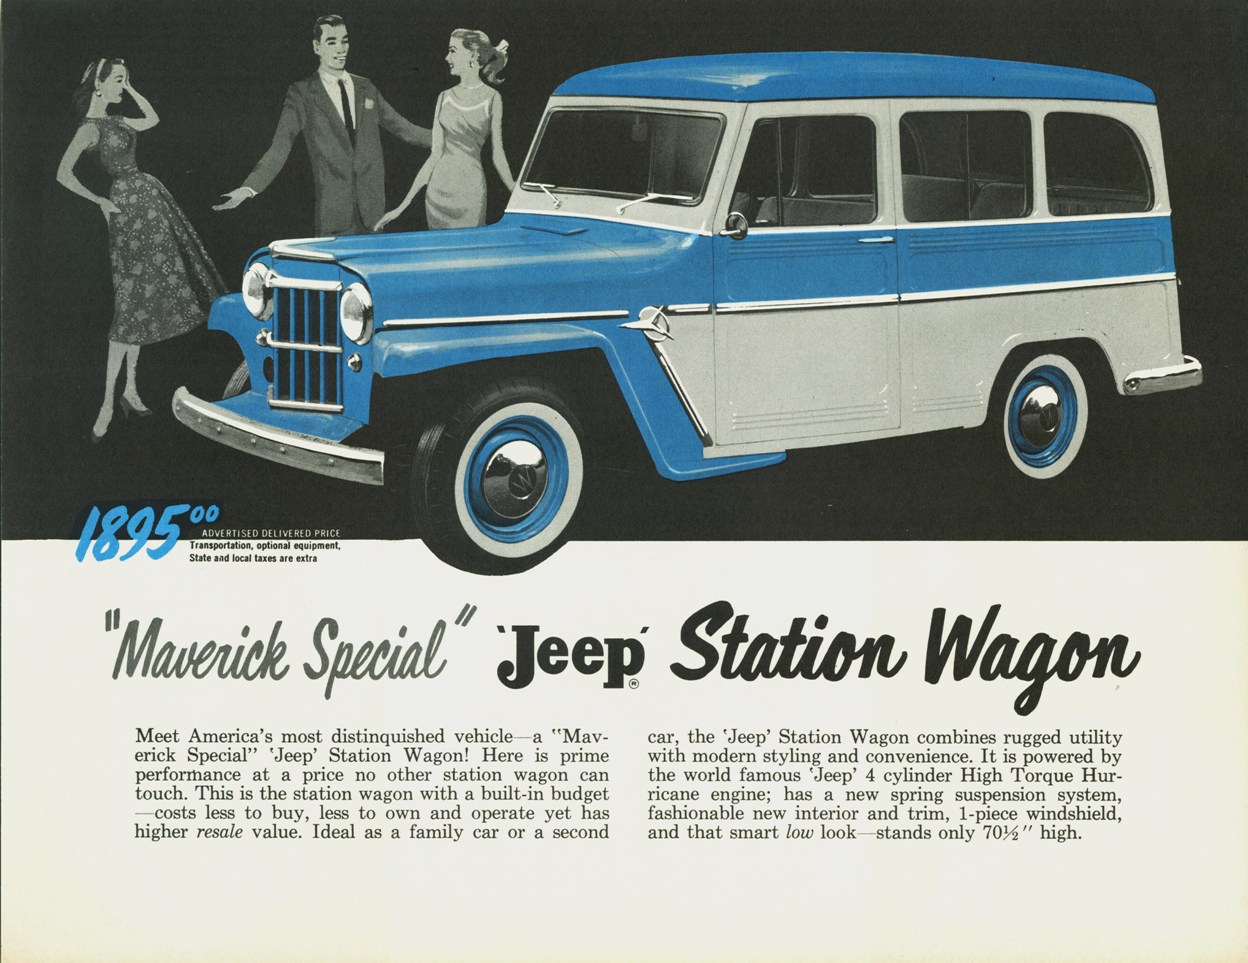 1958 Willys Jeep Maverick Special Station Wagon | Flickr - Photo ...